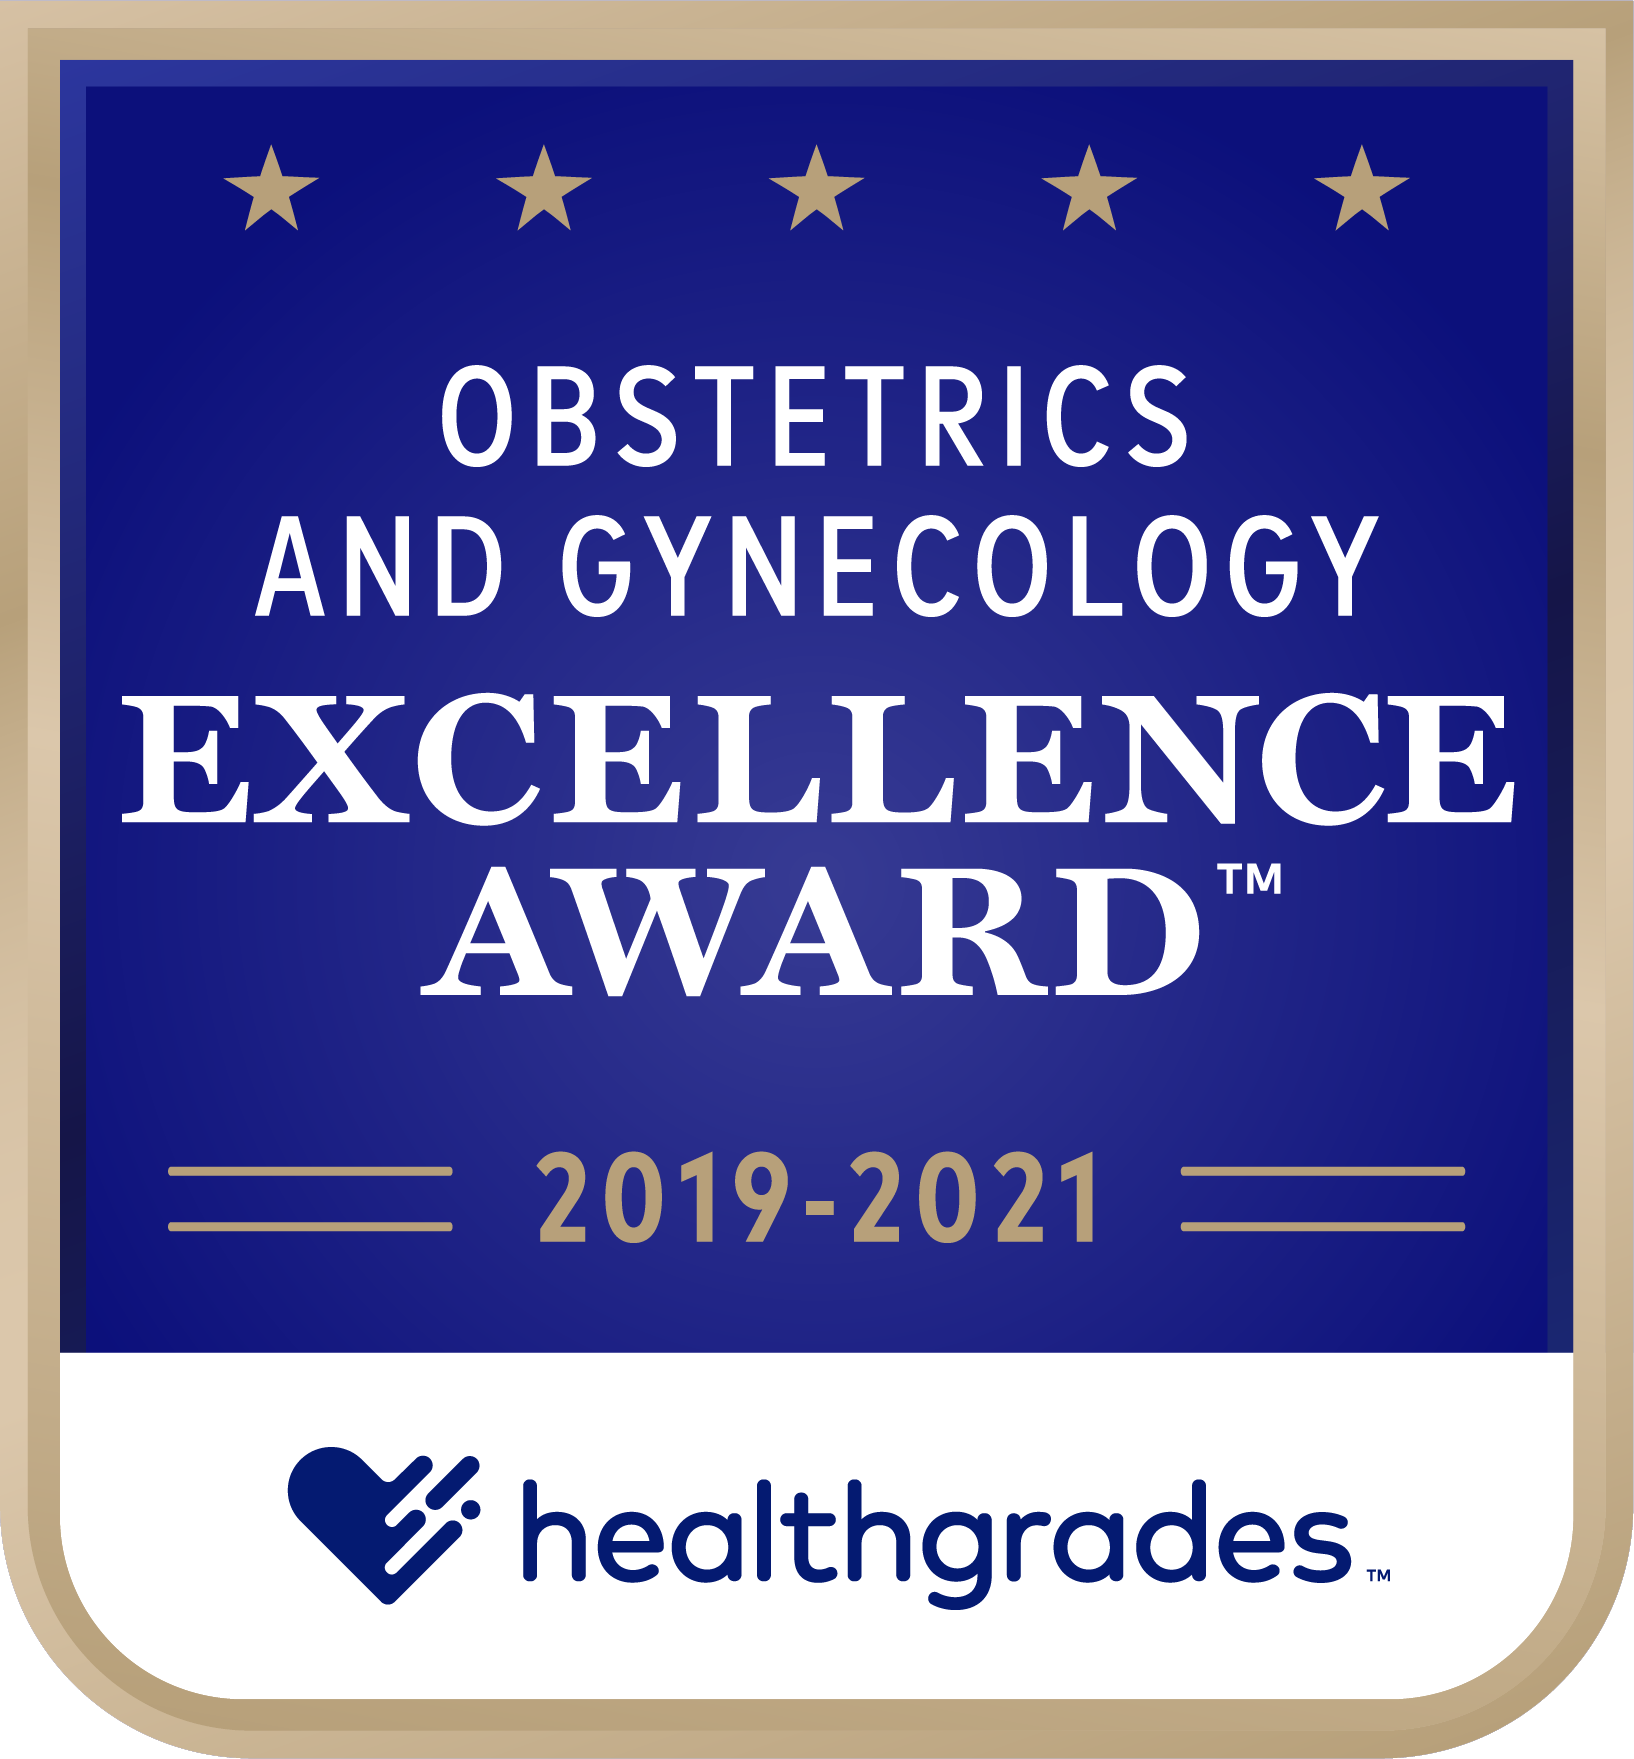 Recipient of the Healthgrades Obstetrics and Gynecology Excellence Award™ for 3 Years in a Row (2019-2021)